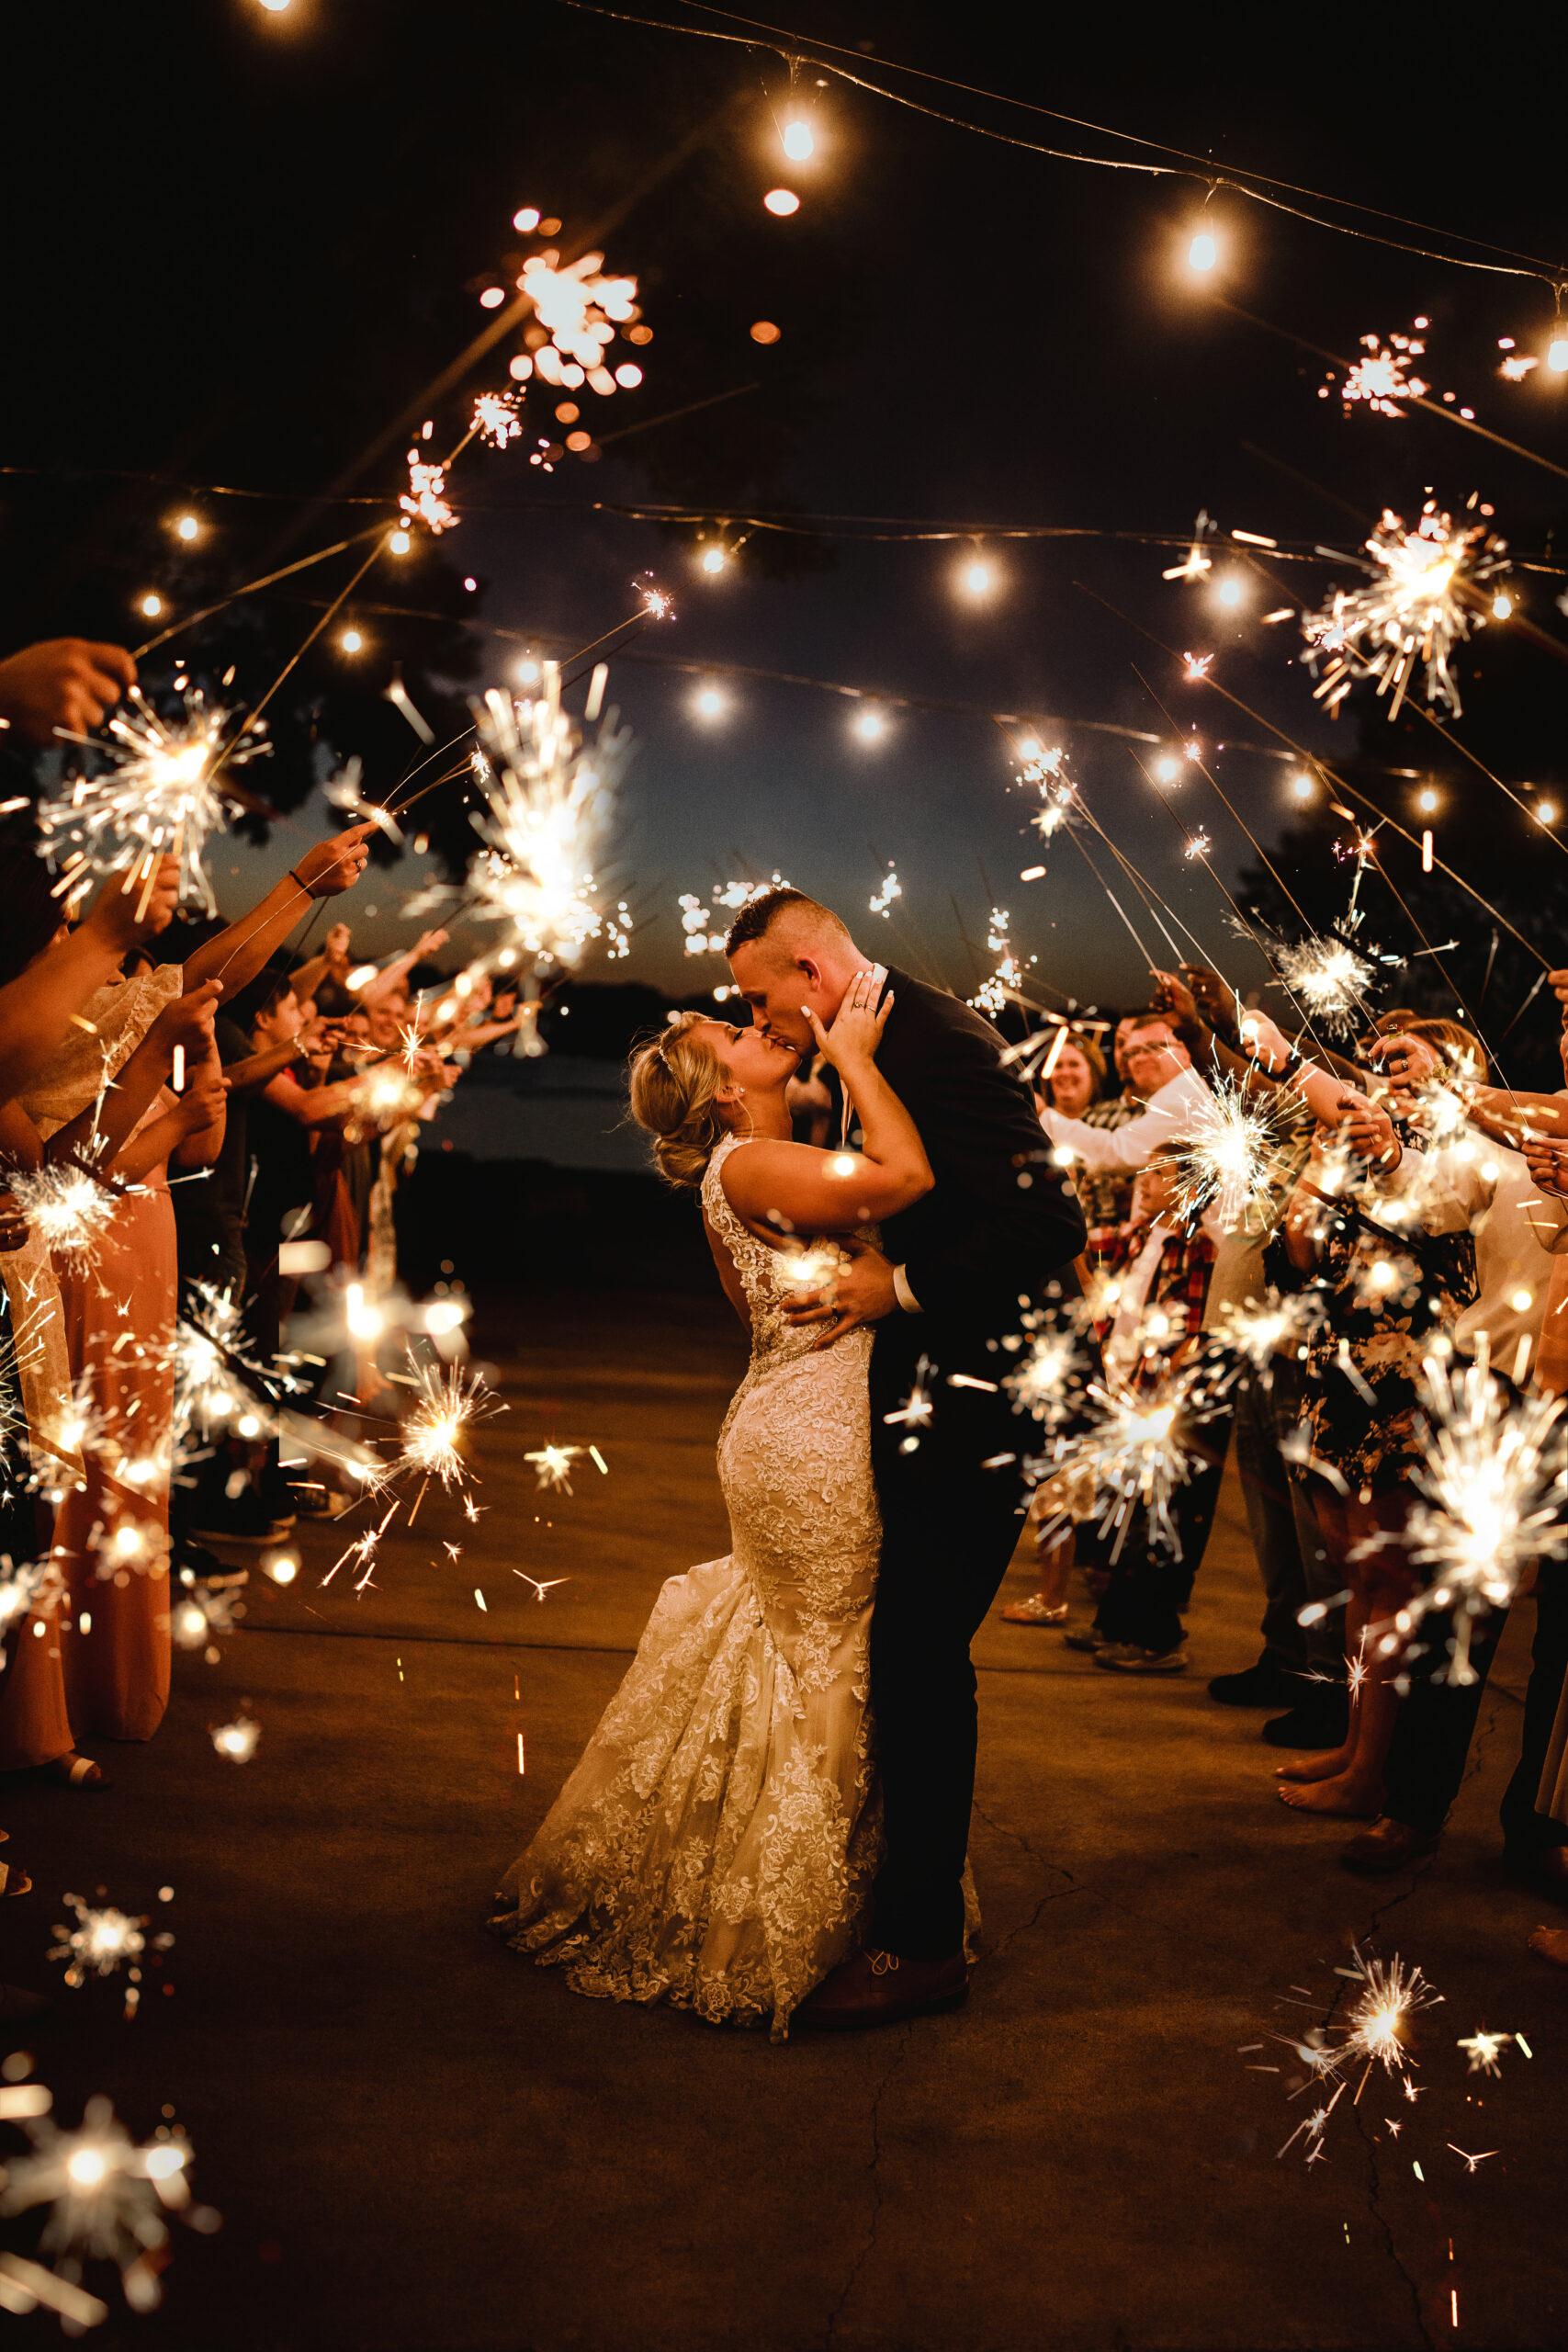 Bride and groom kiss during their wedding reception exit with sparklers held by their wedding guests. Sparkler exit photos Wedding reception photography Bride and groom pose #wisconsinweddingphotographer #choosingaphotographer #lakesidewedding #waterfrontweddingceremony